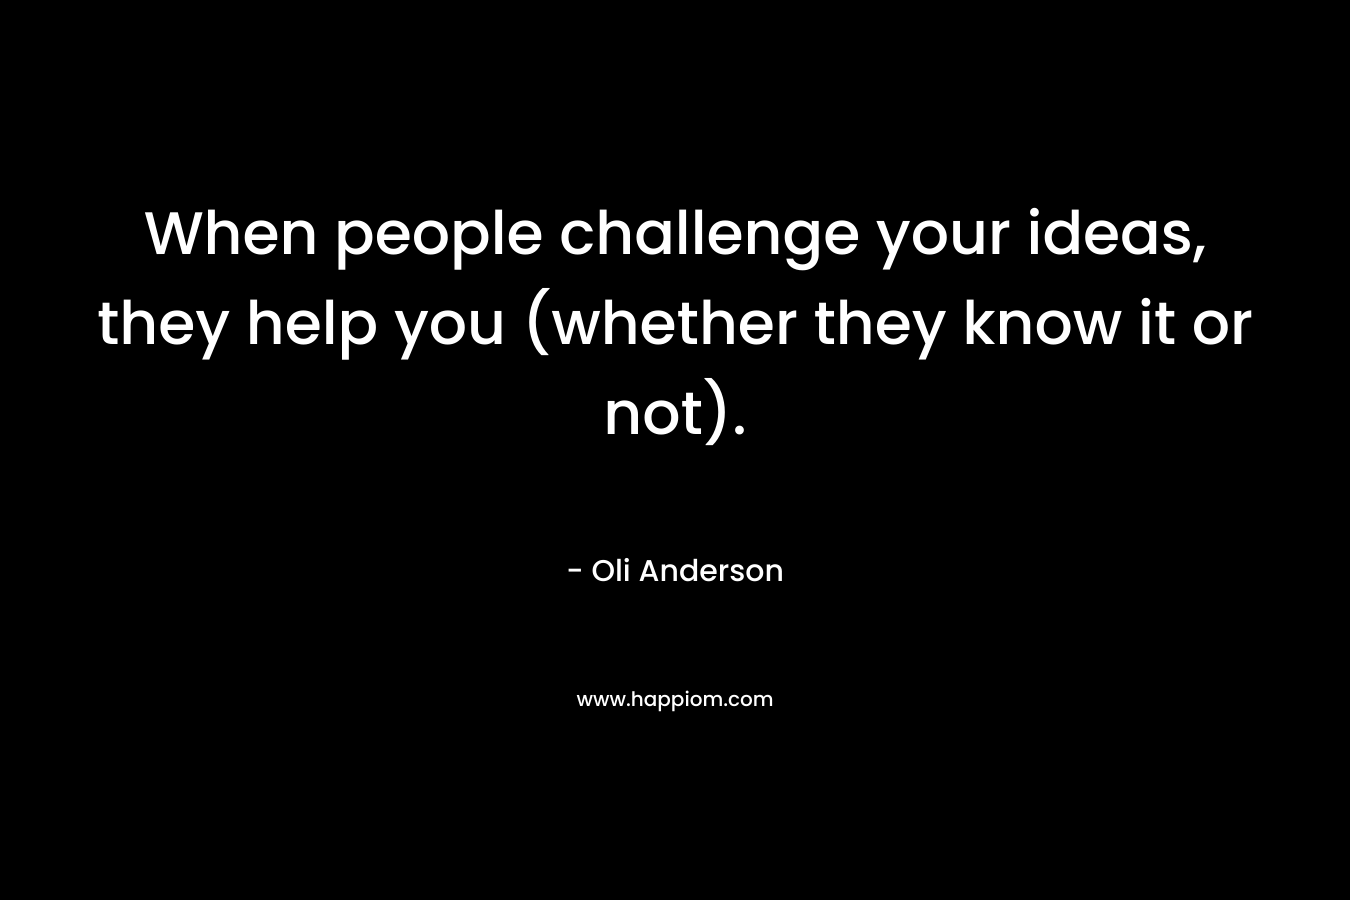 When people challenge your ideas, they help you (whether they know it or not).